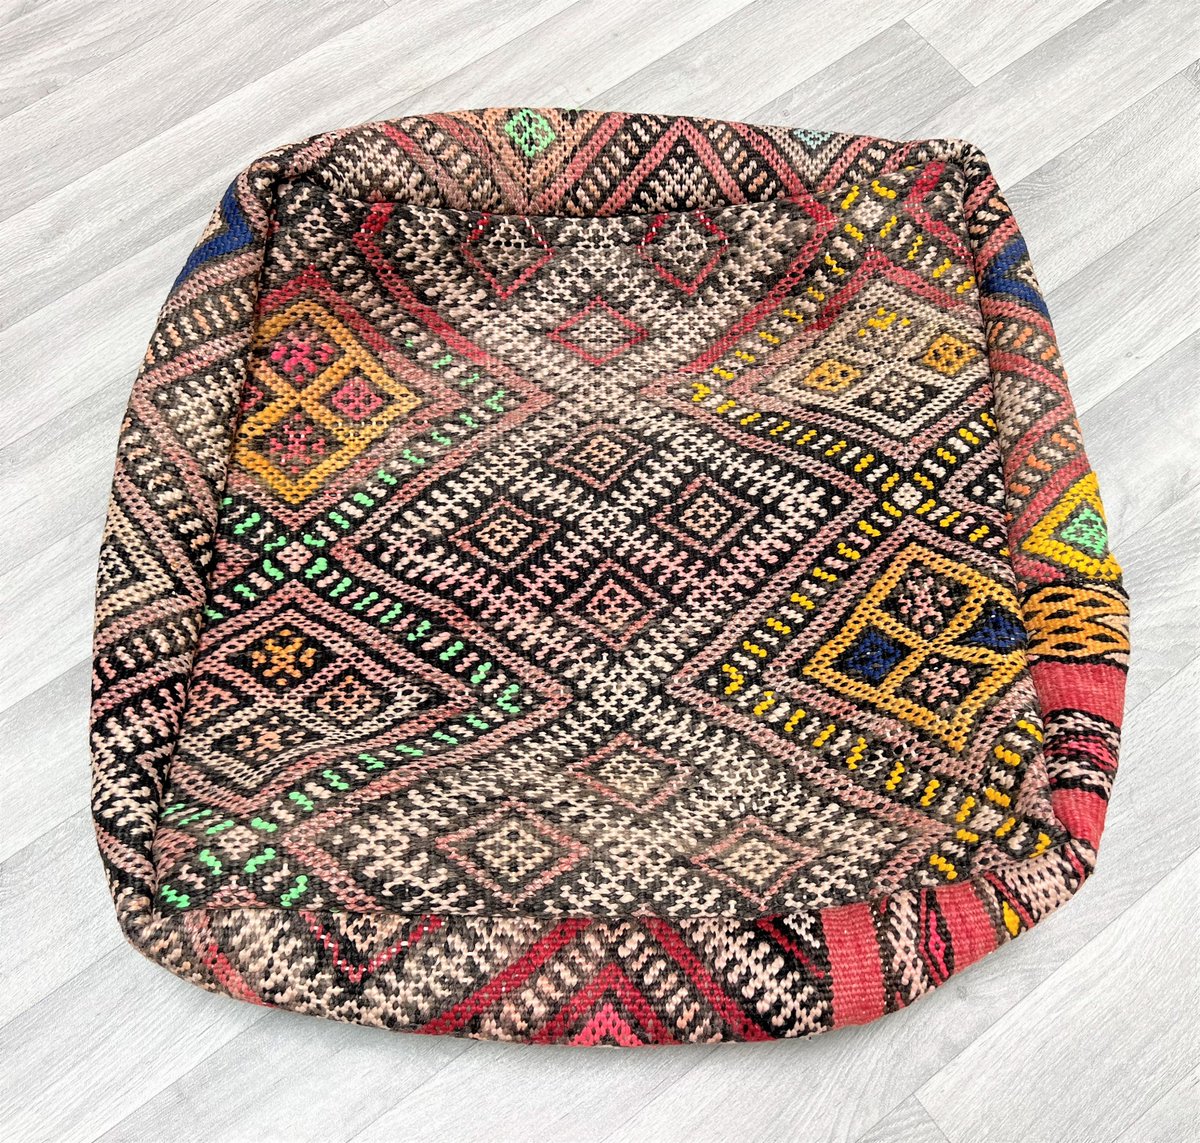 Excited to share the latest addition to my #etsy shop: vintage Moroccan Pouf, Moroccan Berber Kilim Pouf etsy.me/42tK5NB #bathandbeauty #bathaccessories #poufs #homeandliving #handwoven #floorpillows #vintage #berberpouf #moroccanpouf